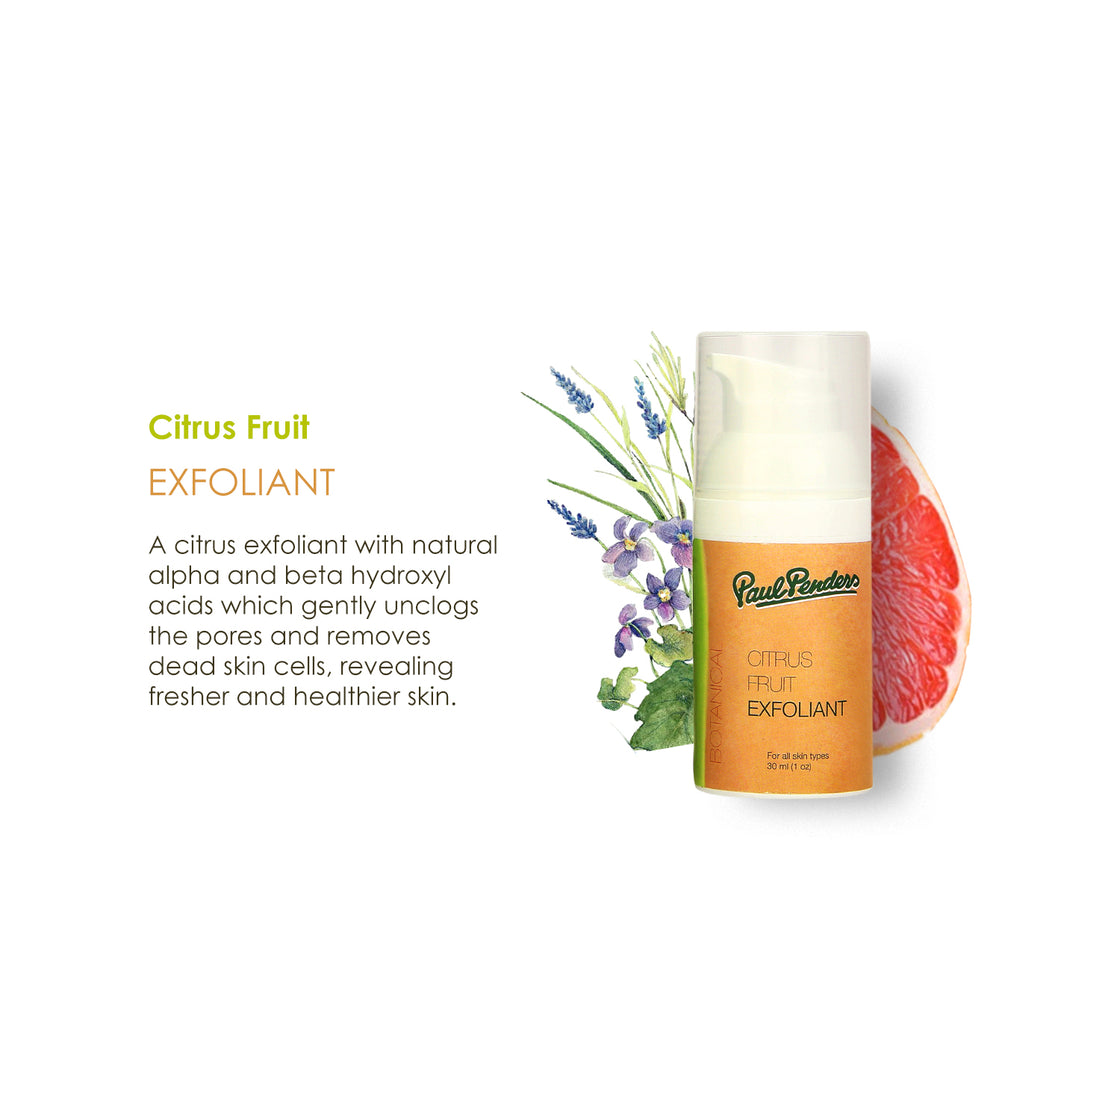 Paul Penders Citrus Fruit Exfoliant | AHA Face Scrub For Unclogging Pores To Reveal Smooth & Healthy Skin | Whitening Effect 30ml